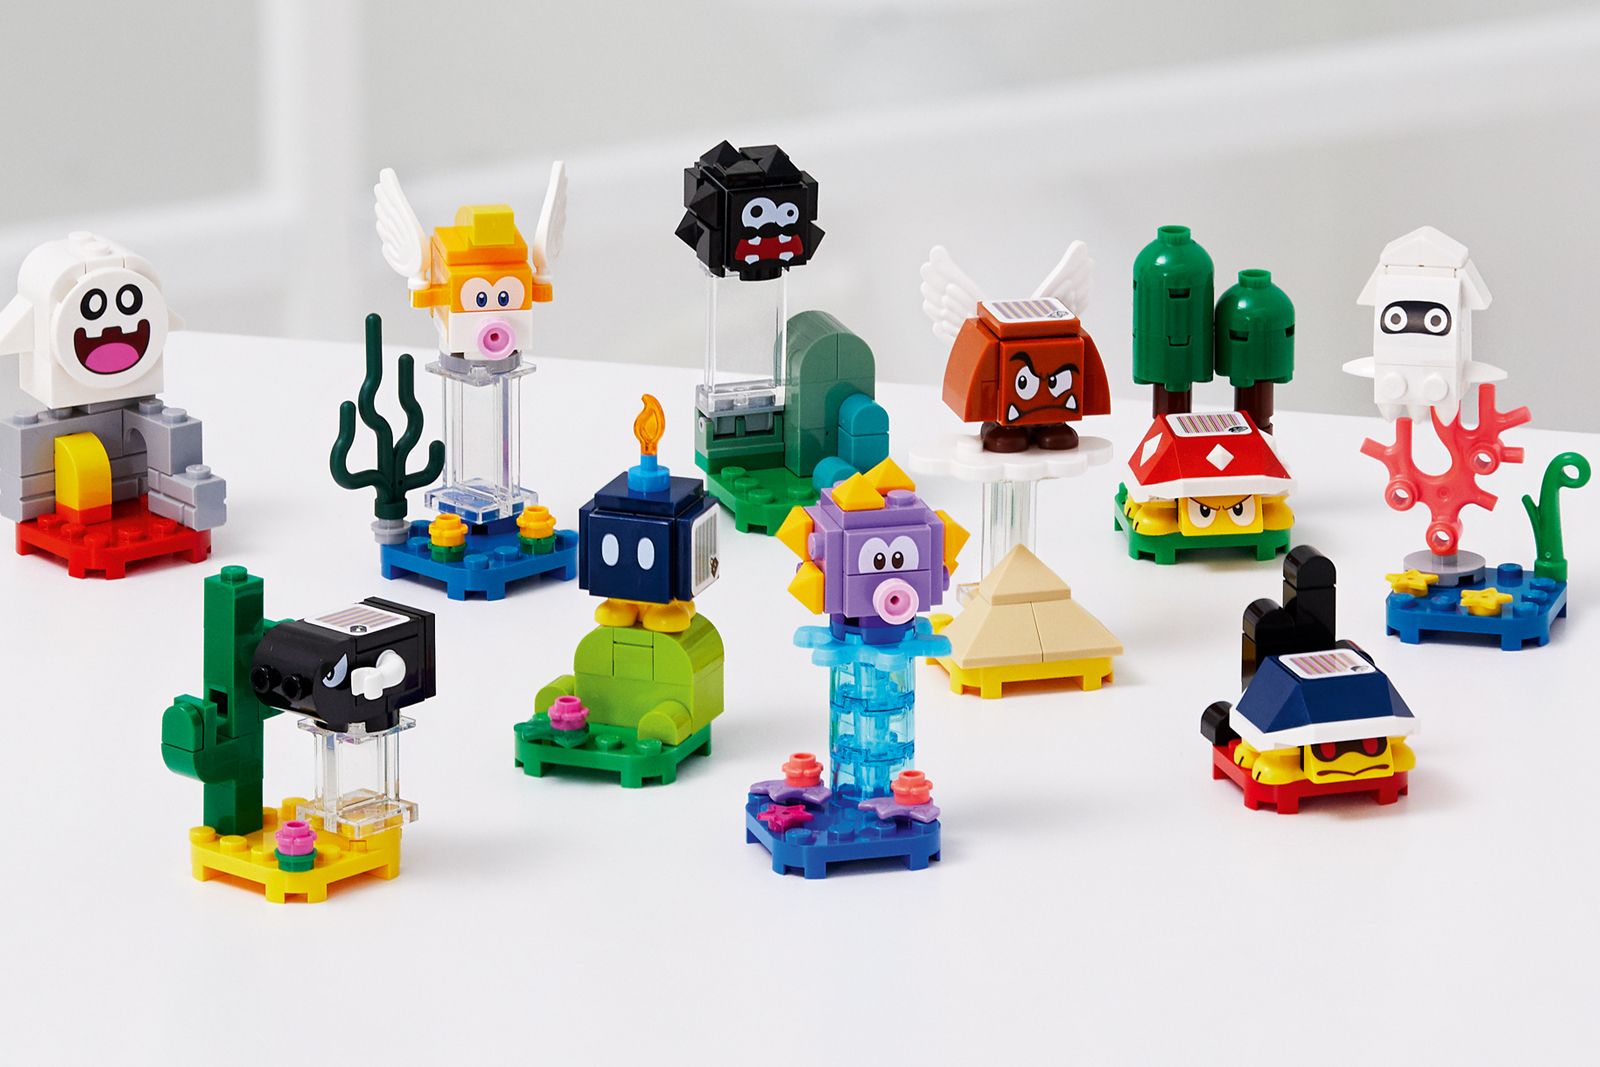 First Super Mario Lego Sets Detailed - Including How Mario Interacts With The Bricks image 1